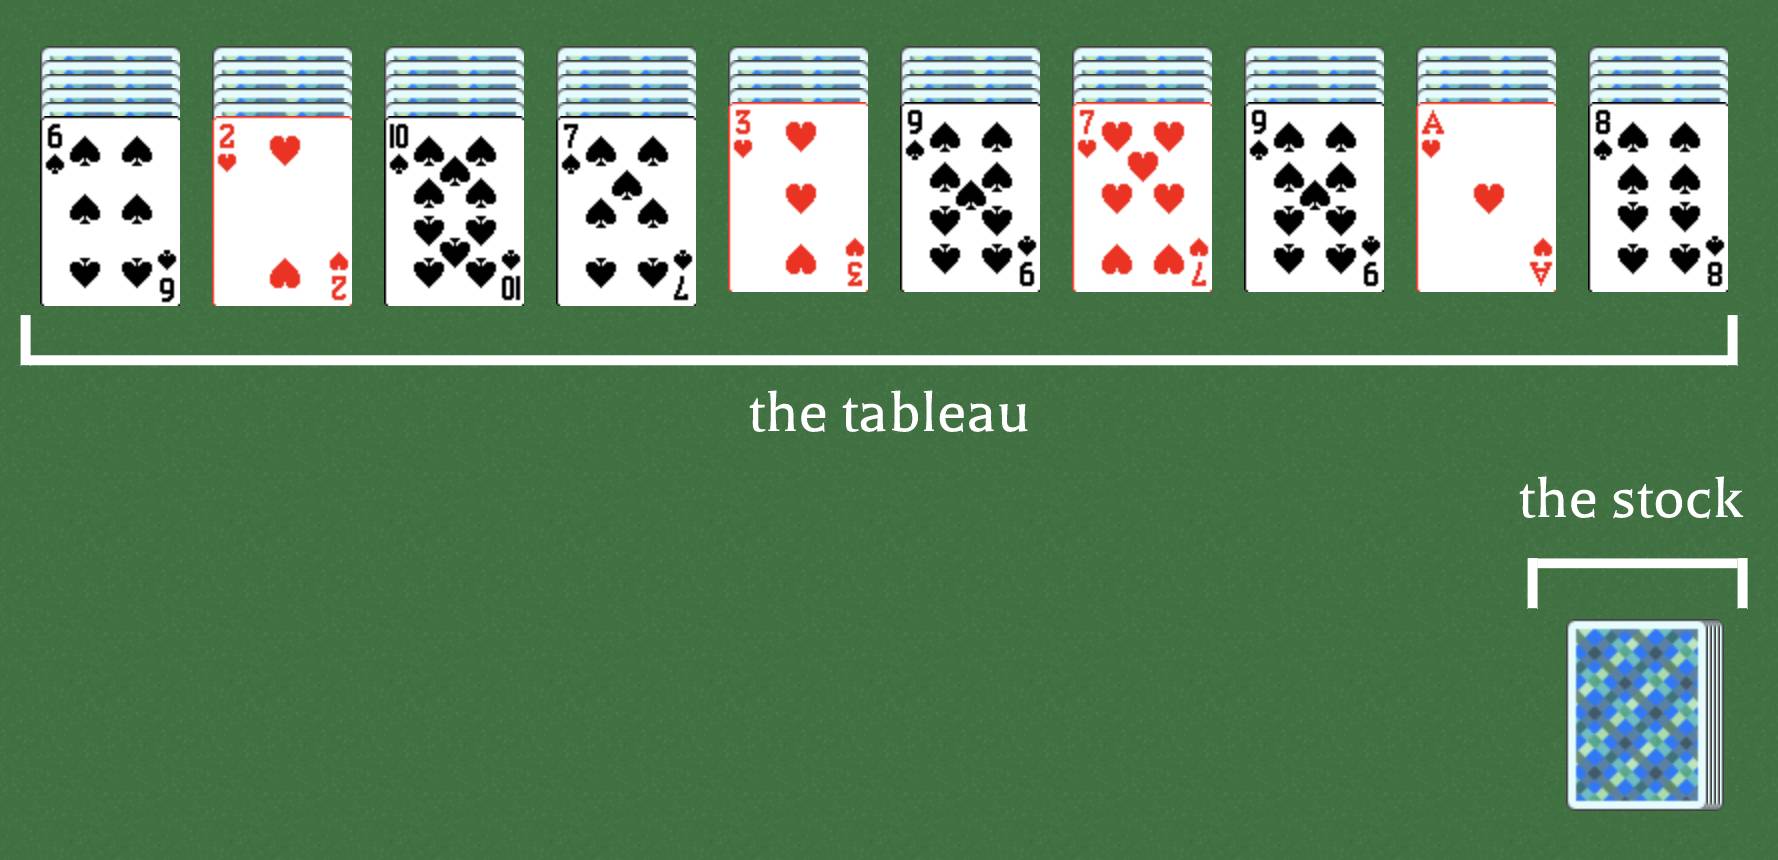 Spider Solitaire Layout